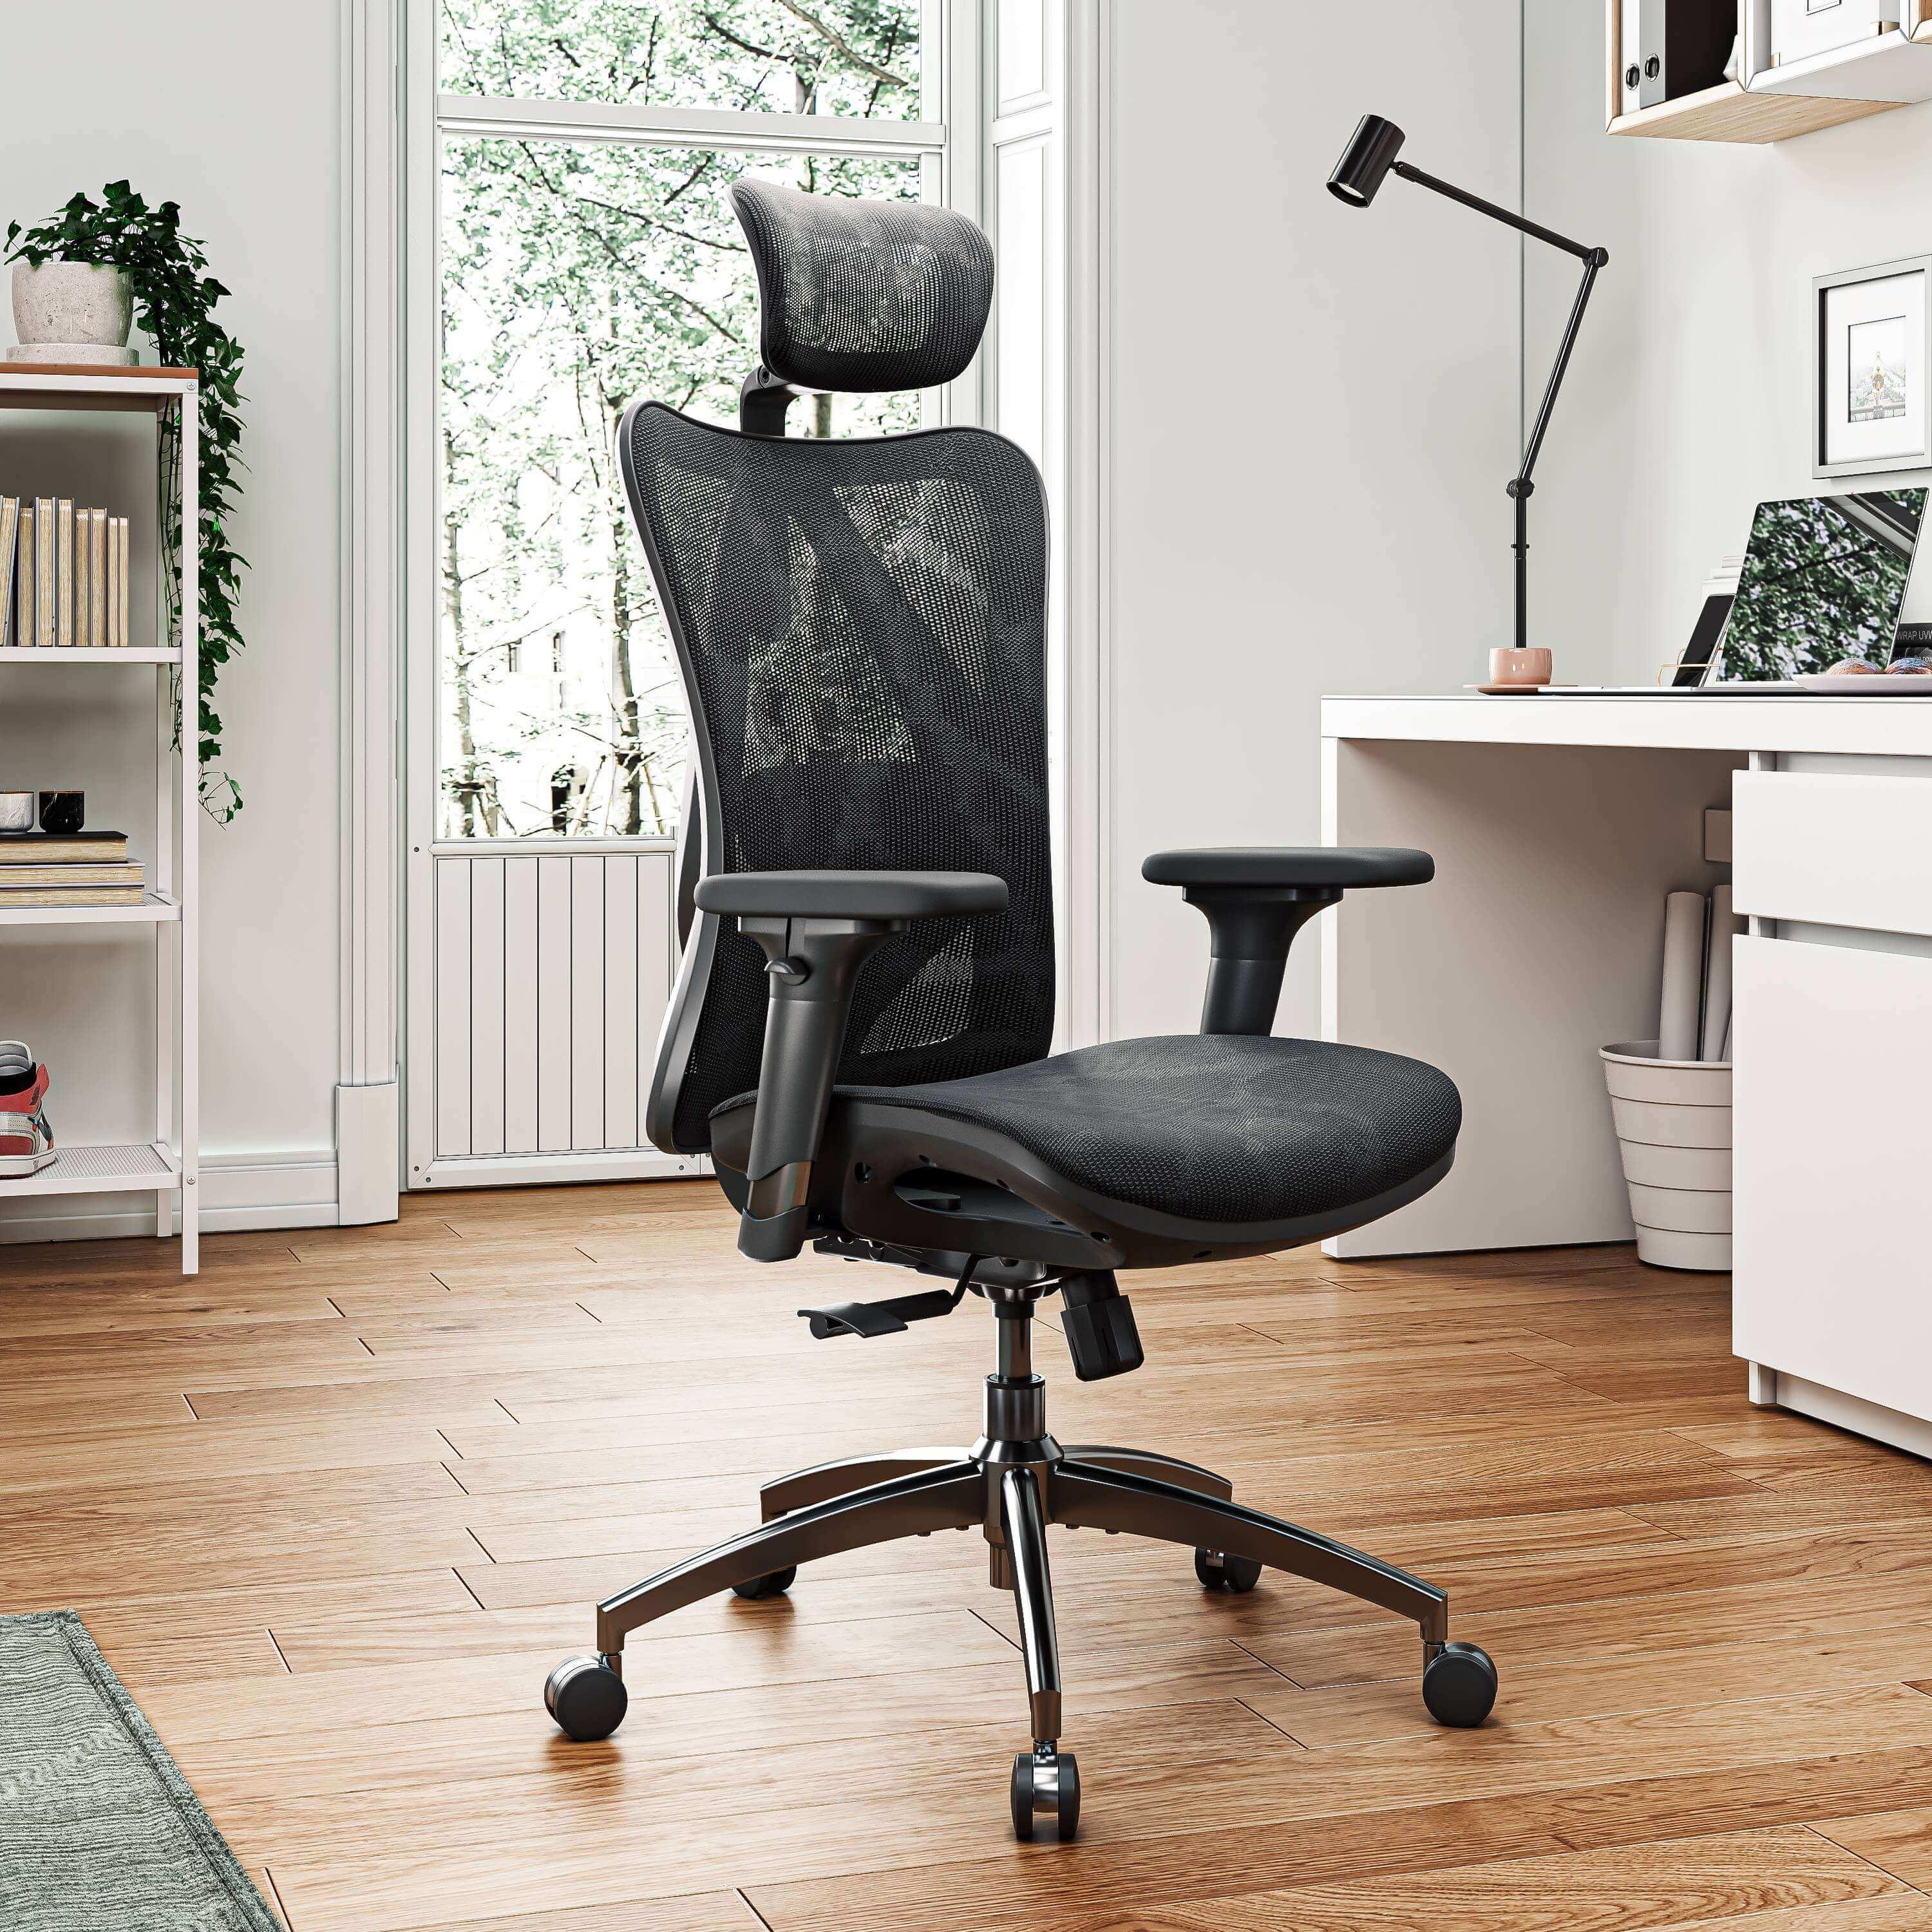 SIHOO M18 Ergonomic Office Chair 2023 REVIEW - MacSources